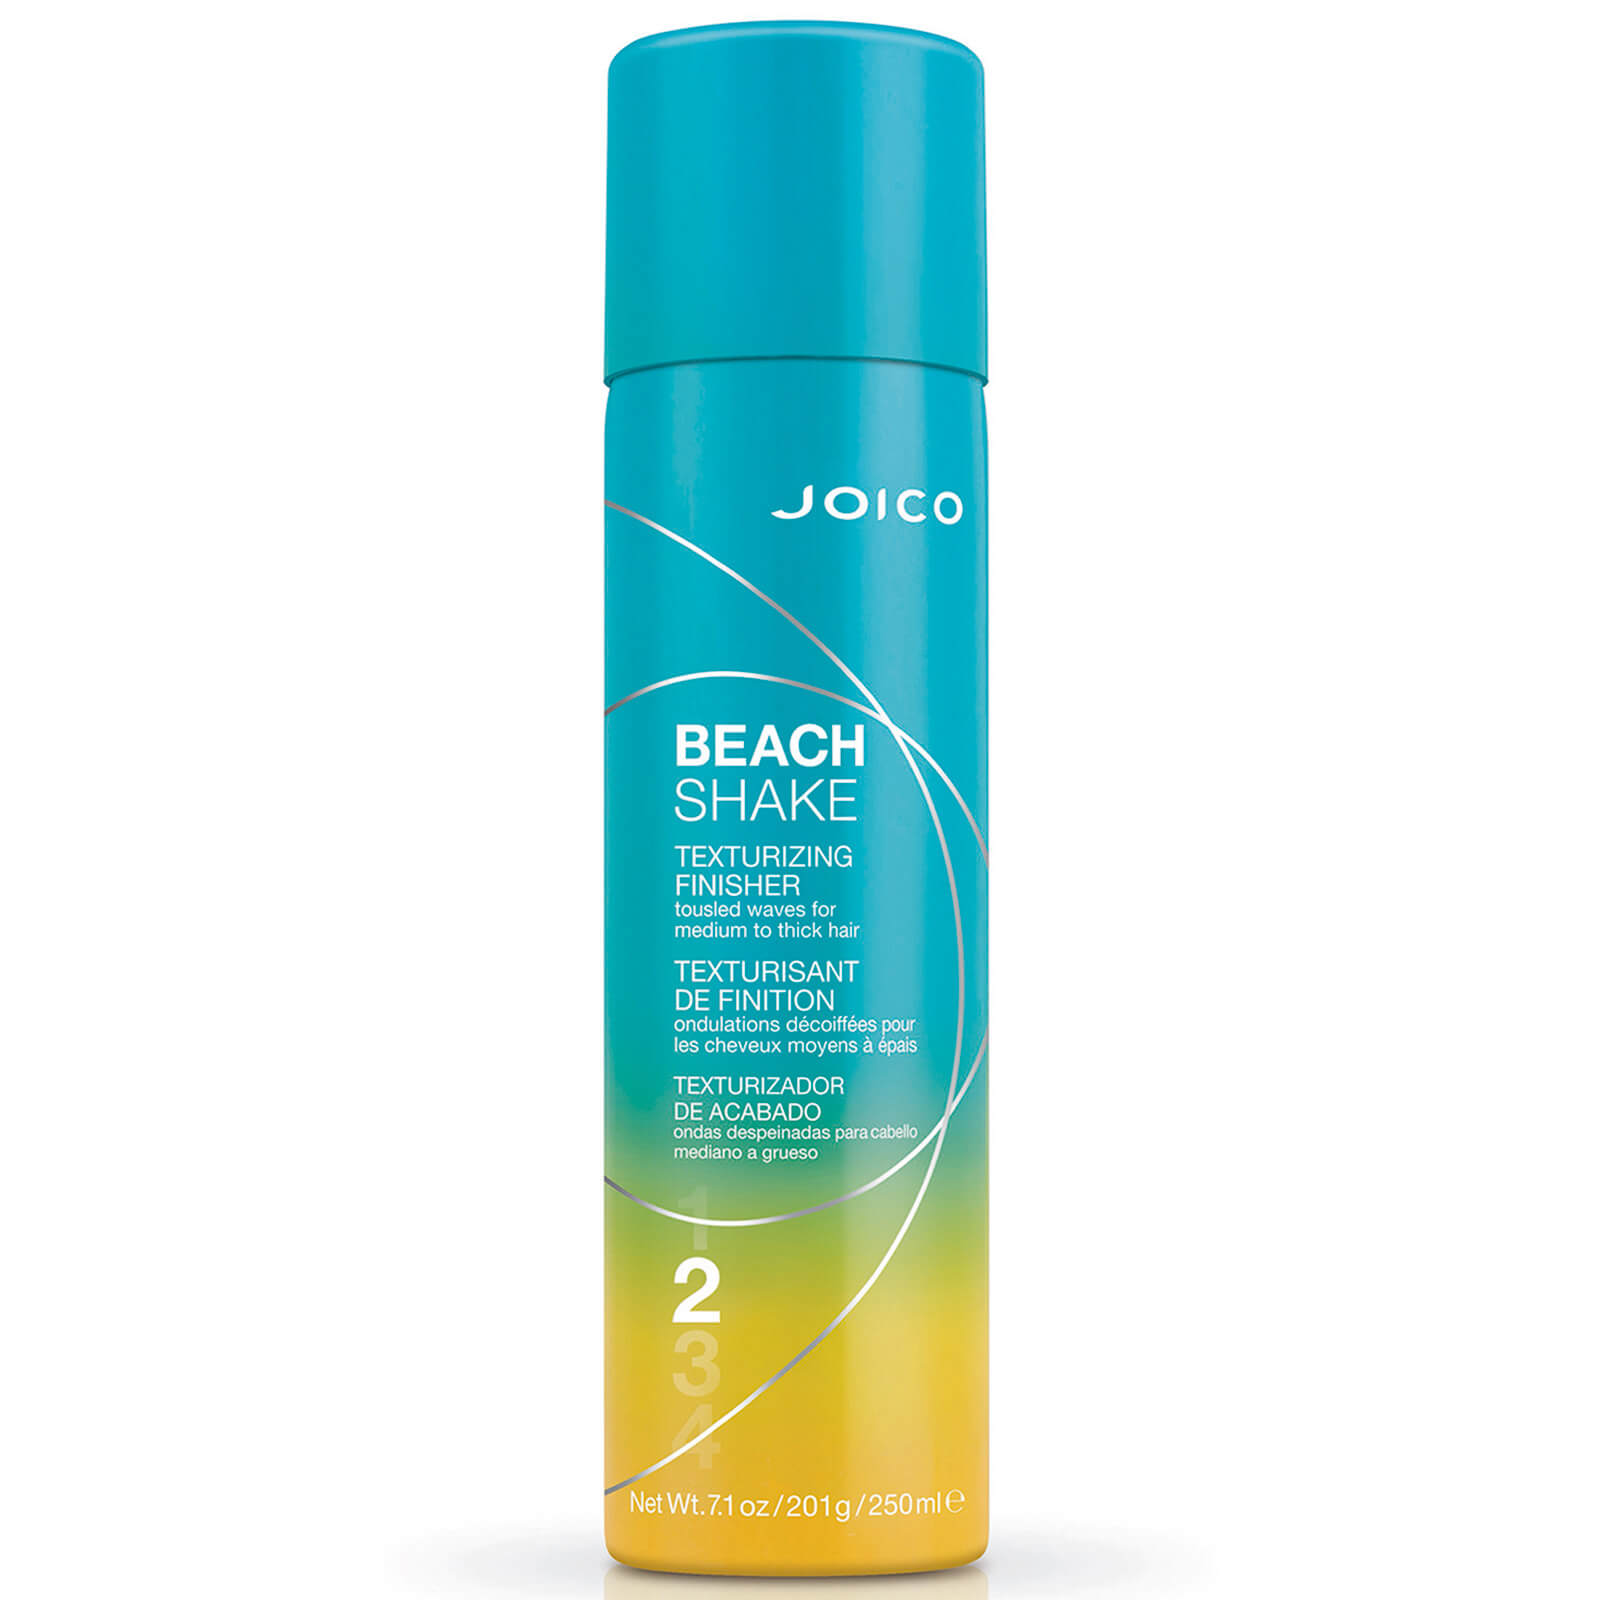 Image of Joico Beach Shake Texturising Finisher Tousled Waves for Medium/Thick Hair 250ml